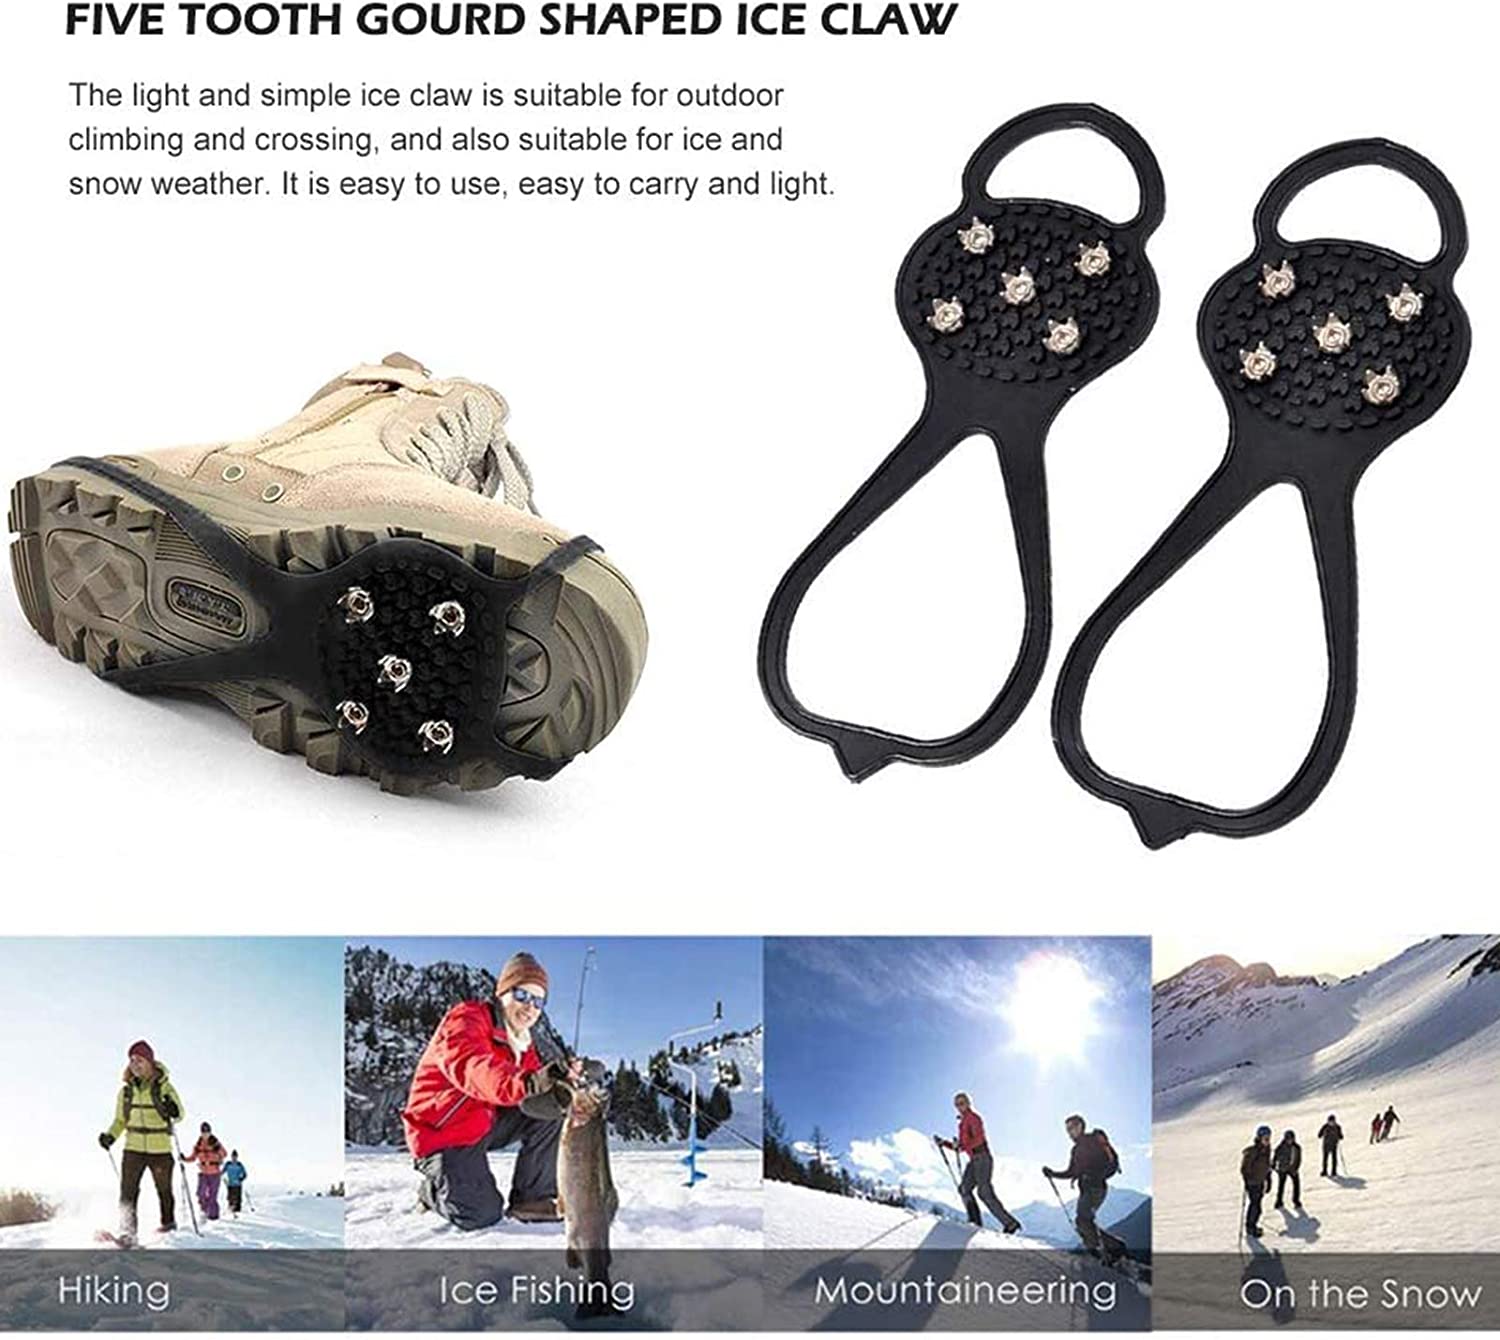 (🔥Christmas Promotion - Buy 2 Get 1 Free🔥) Silicone Climbing Non-Slip Shoe Grip